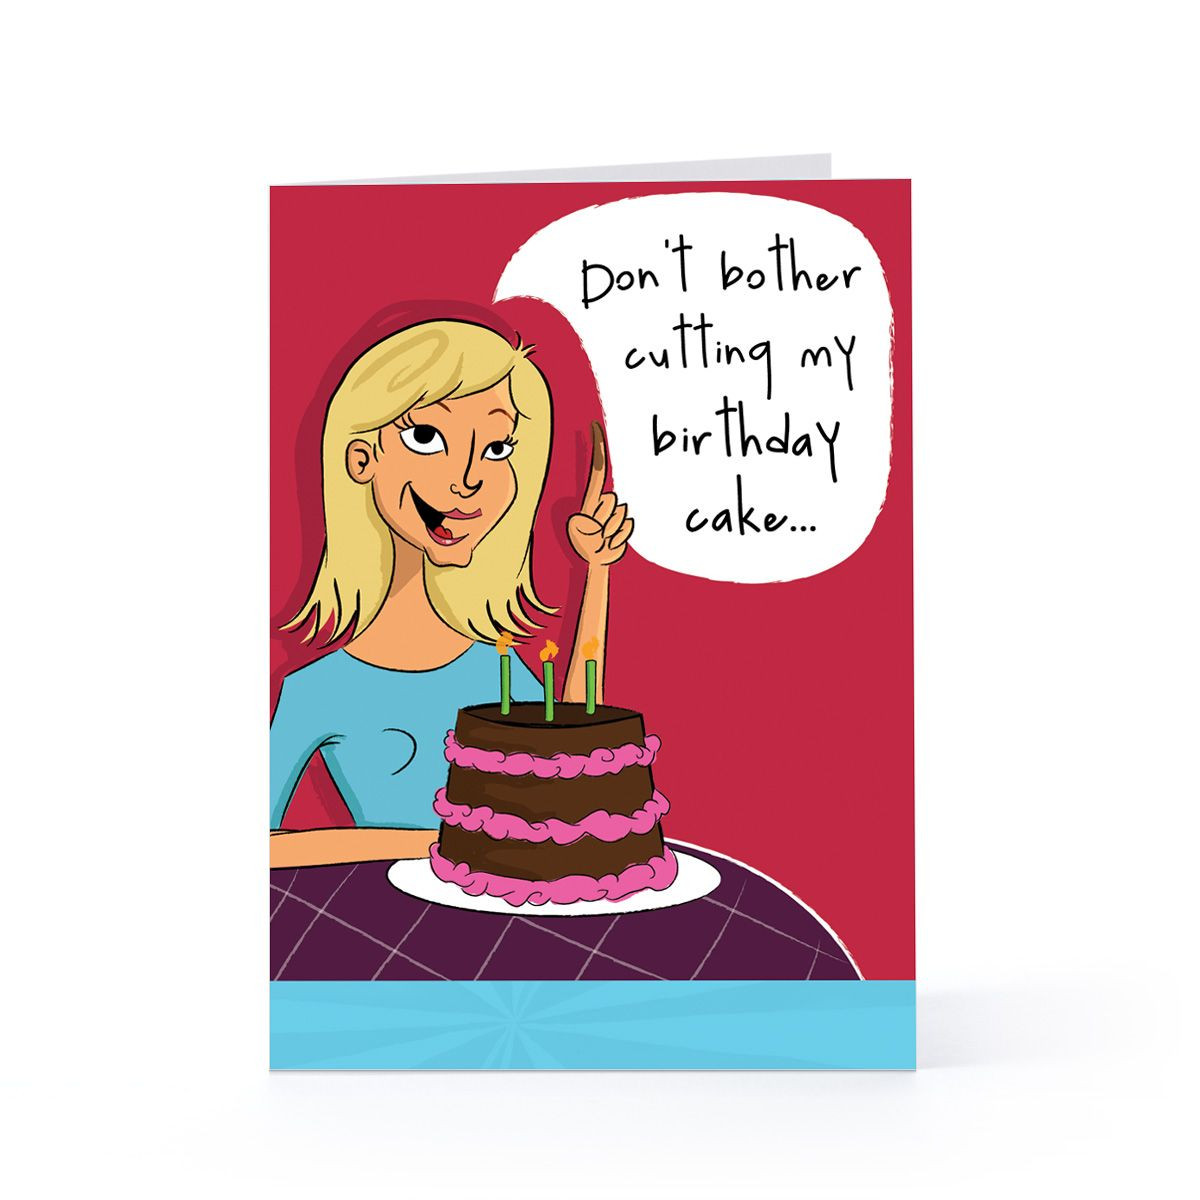 Funny Birthday Card Quotes
 funny sayings for birthday cards funny saying